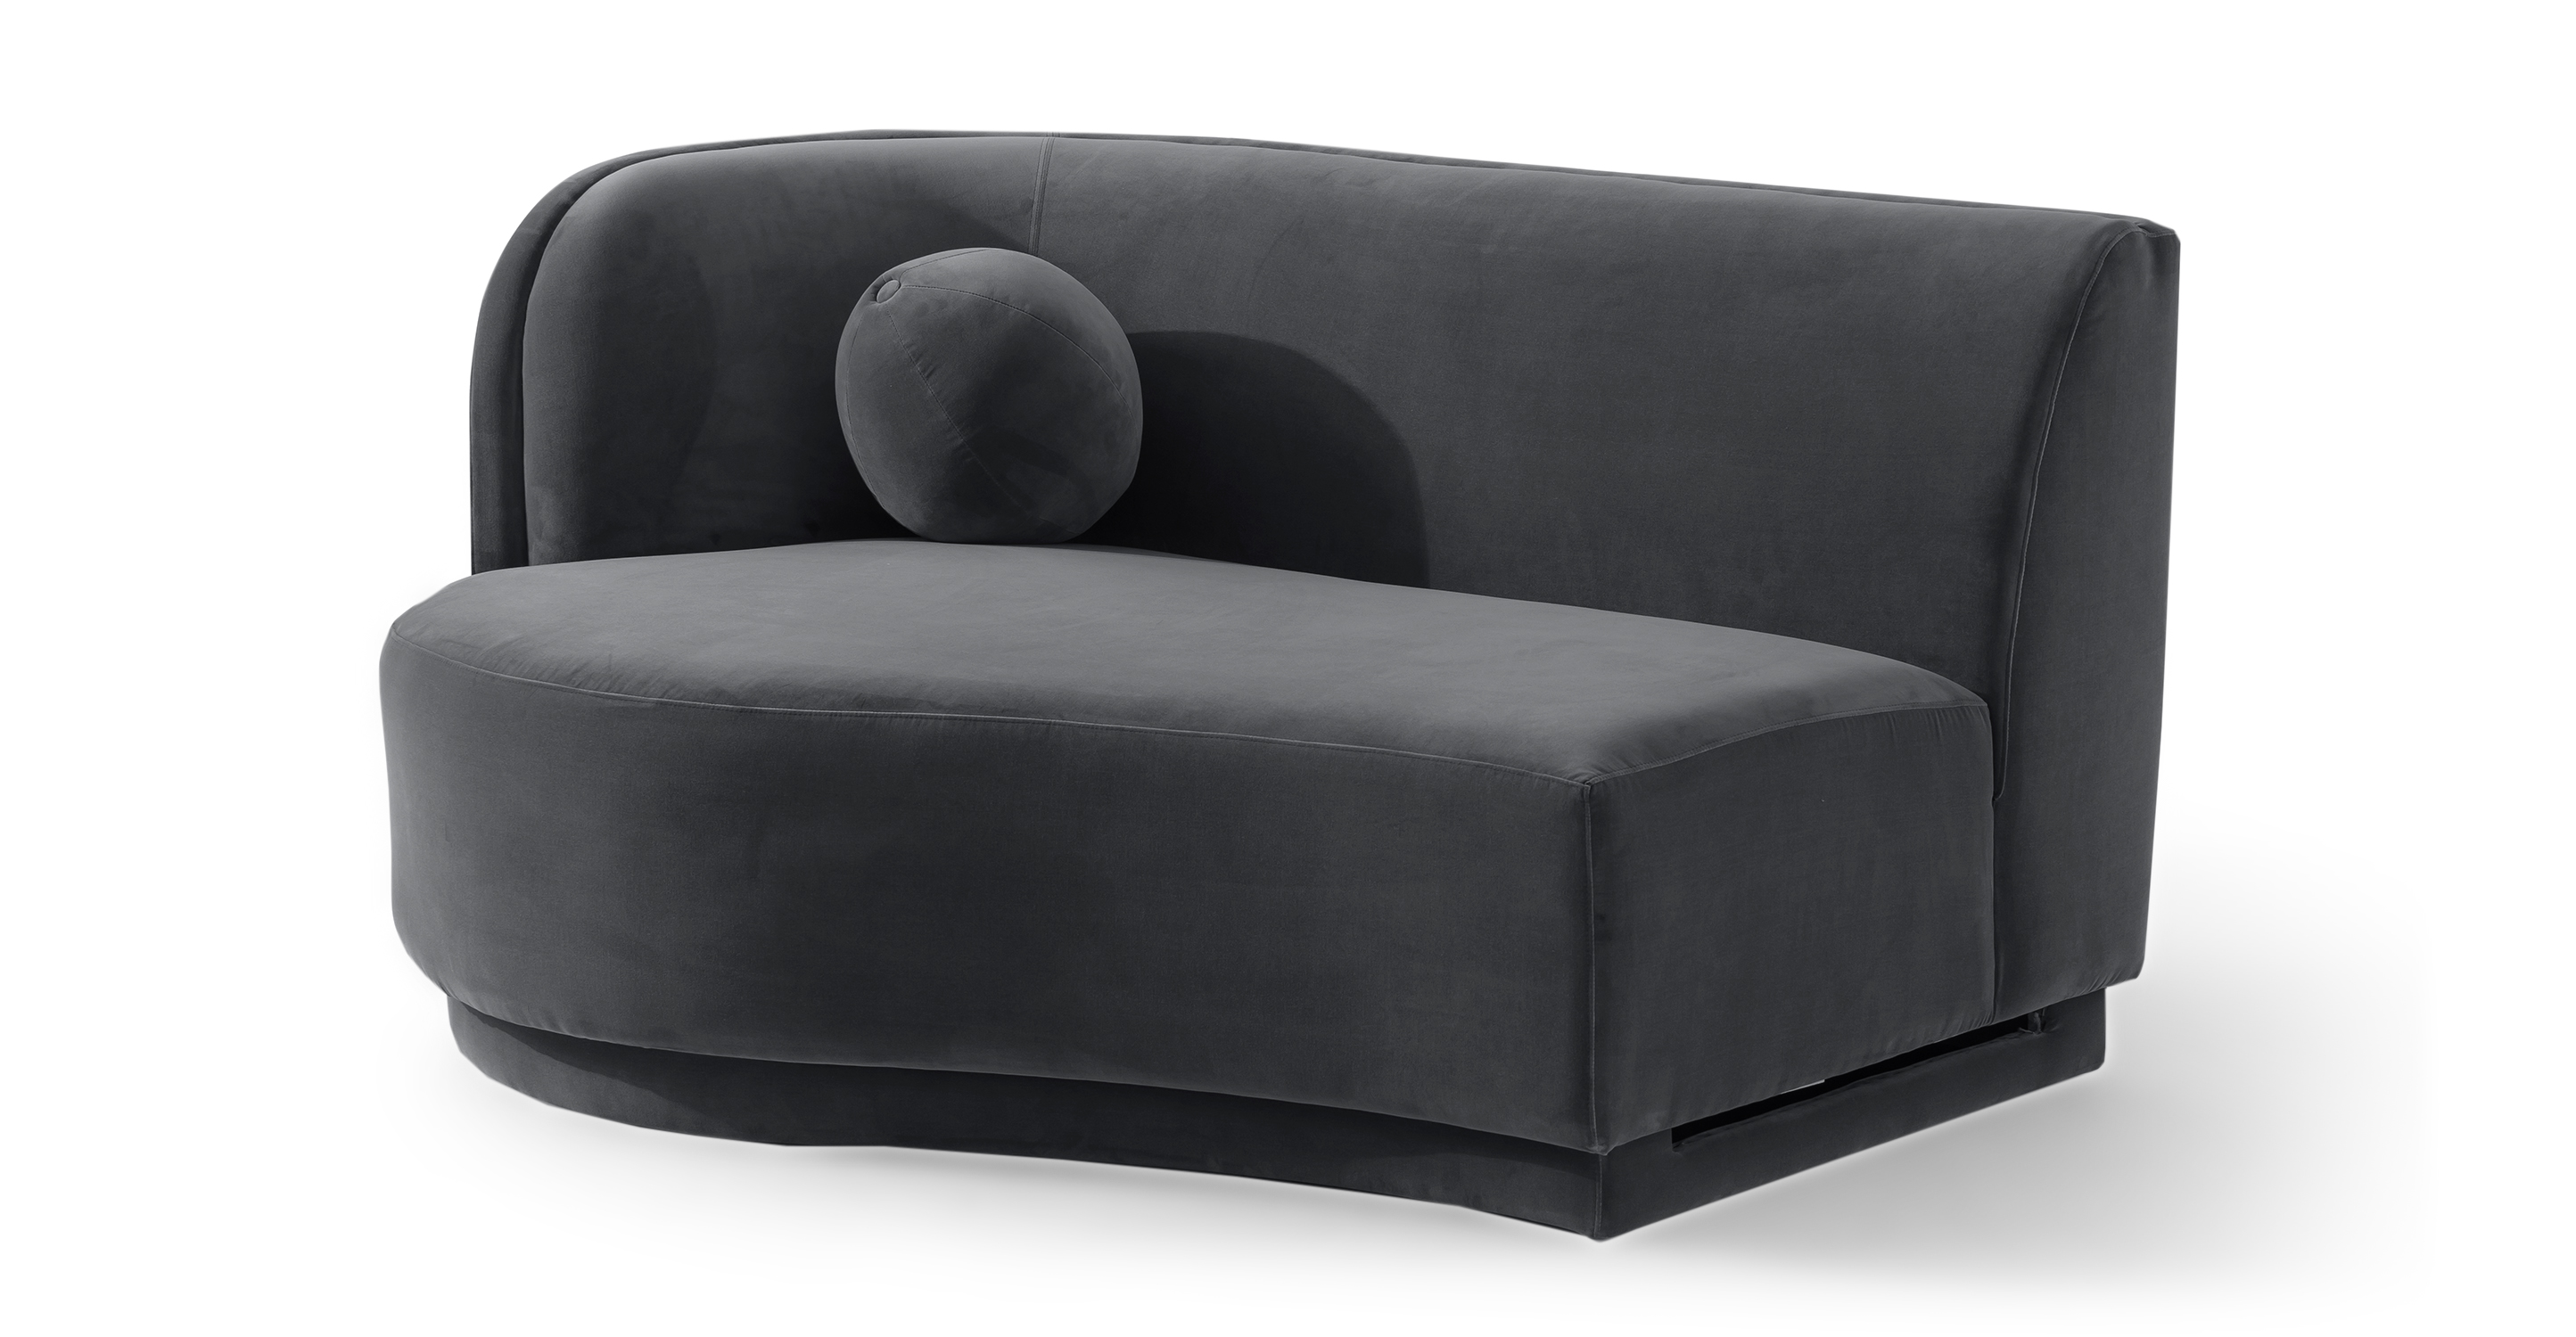 The Swoosh is a modular floor sofa series. A narrow indented frame supports the one-piece thick seat cushion. The back is attached and angled for nice lumbar support. This part is the left Chaise in gray Fossil velvet.